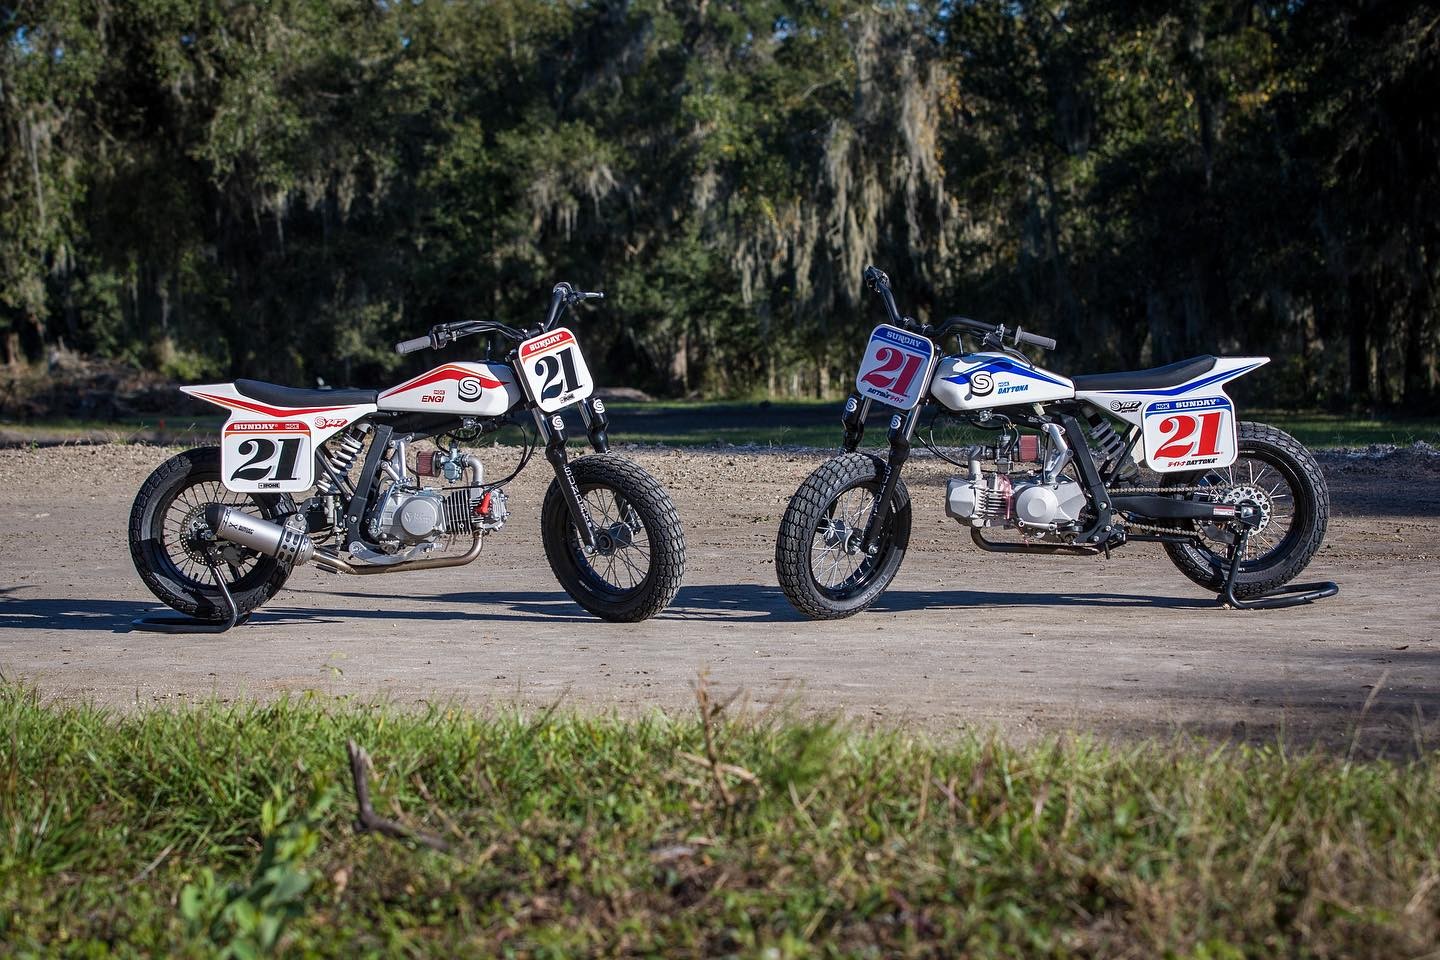 Left or Right ?
S147 or S187 ?
🔴 or 🔵 ?
—
#sundaymotors #flattrack #moto #ycf #motorcycle